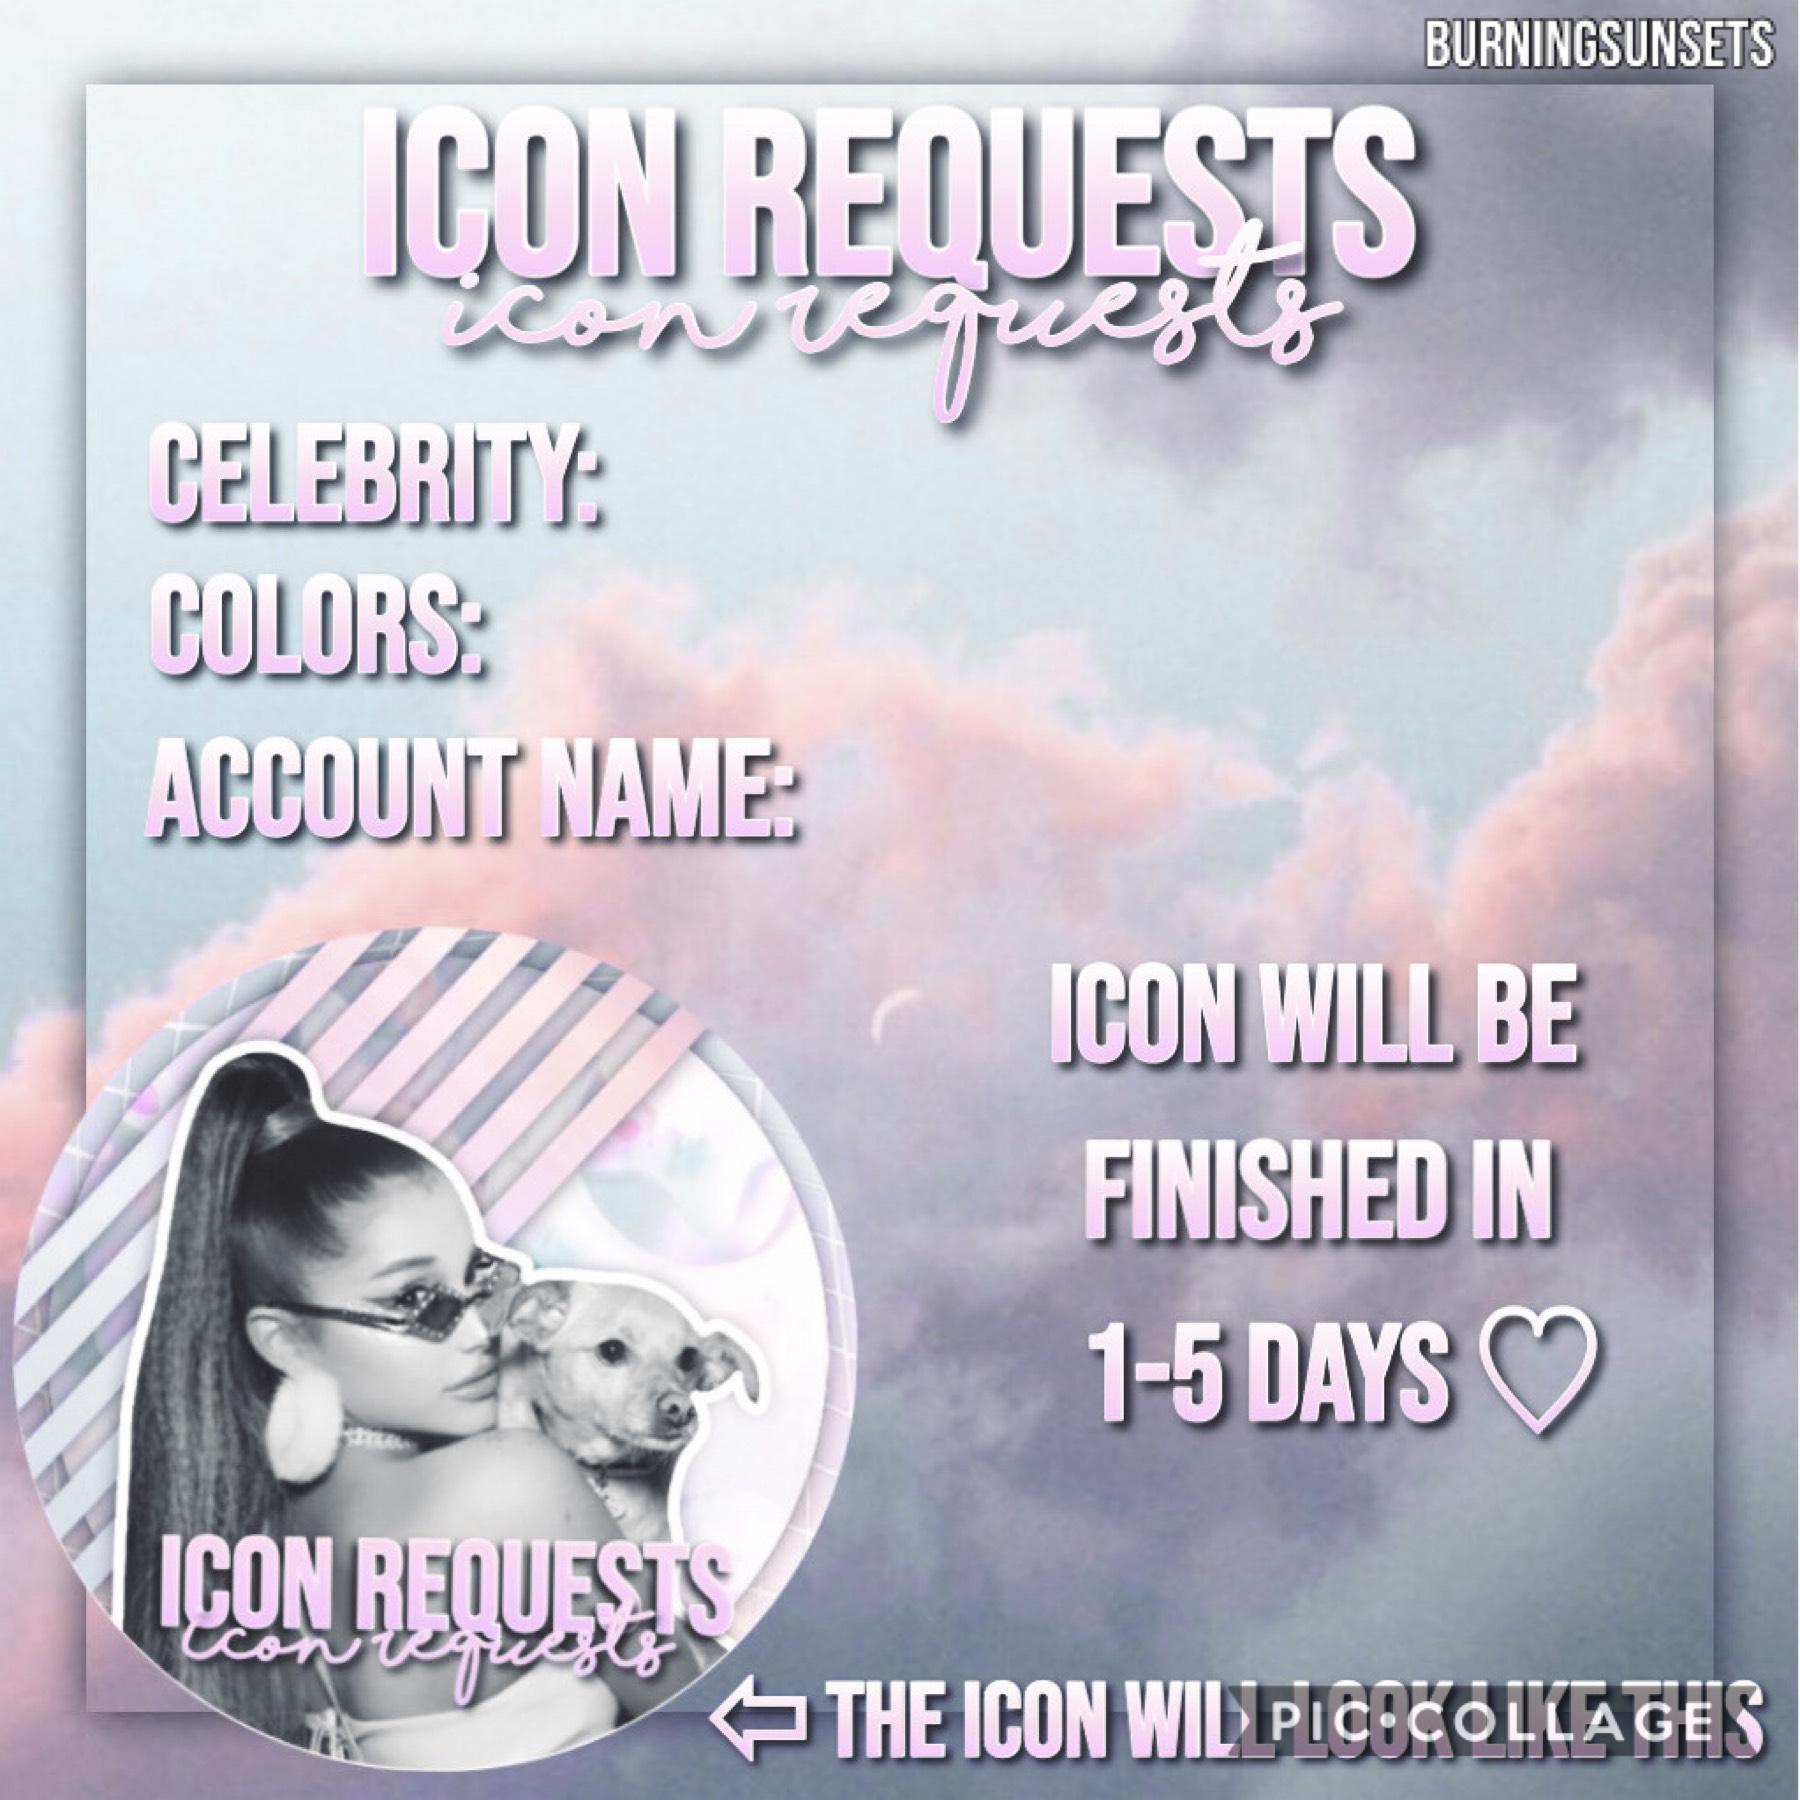 Open Please ⇩
hey sisters 💕
icon requests are still open, so you can request one by filling out this form and giving me credit ✨
if you already commented on my other requests post, you don’t have to fill this out. im currently working on those requests.
t